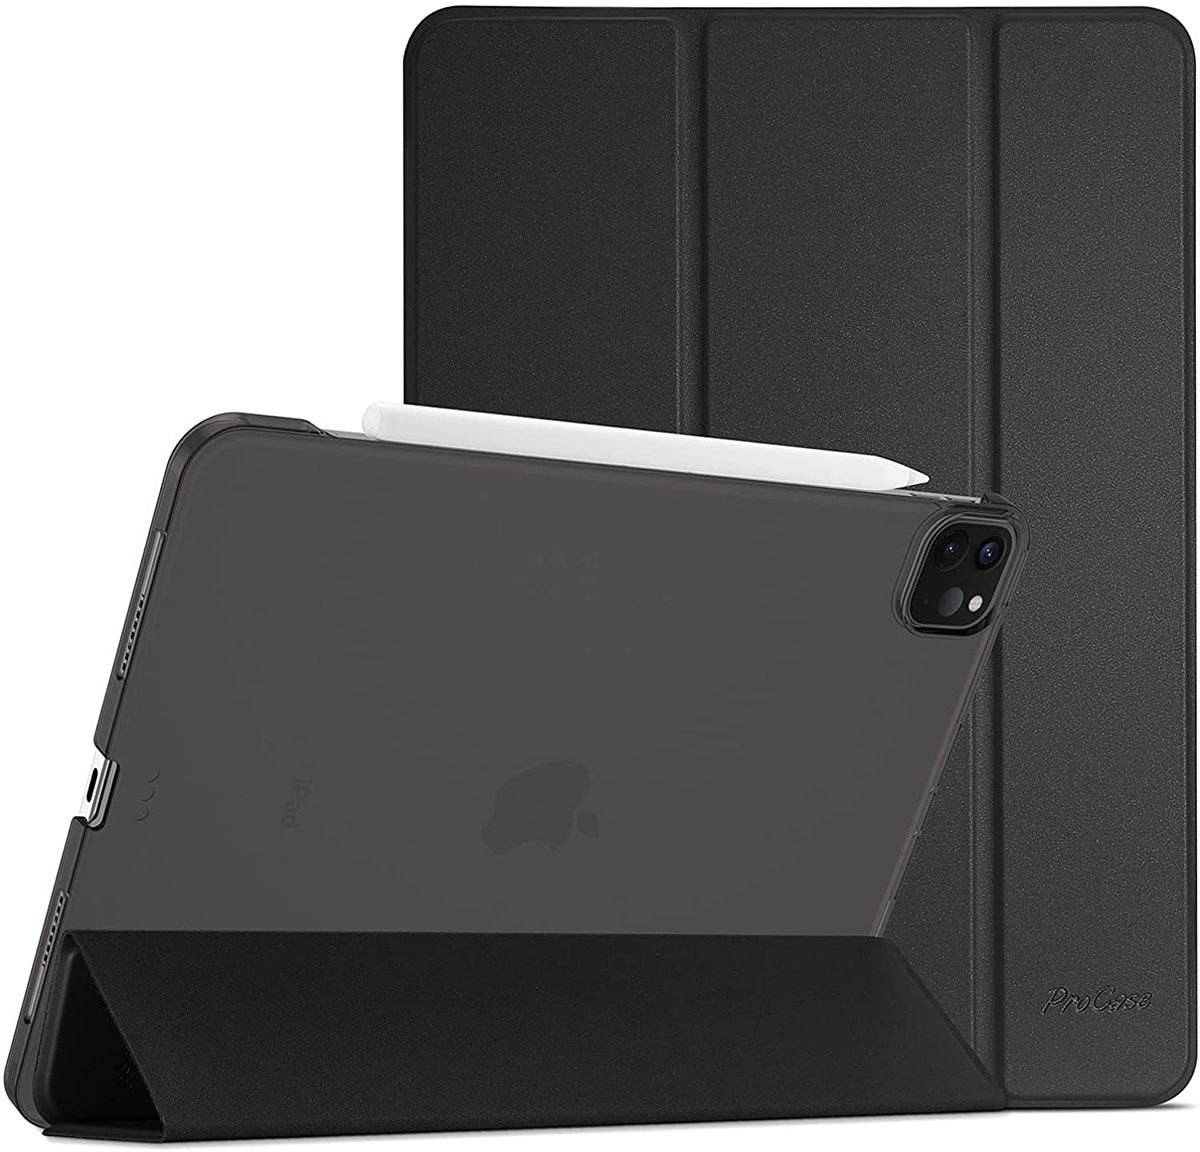 The ProCase Smart Cover for the iPad Pro 12.9 features a translucent frosted back shell and a magnetic smart cover to safeguard your tablet. The smart cover can also double as a stand so you can enjoy videos hands-free. It comes in four color options.